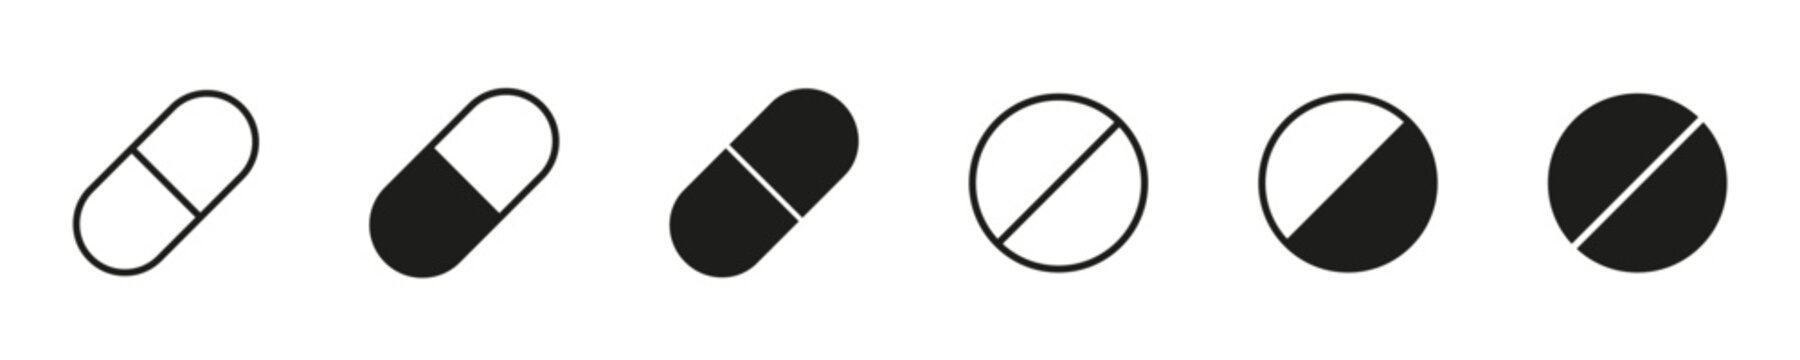 Pills icon vector set. Simple and editable pills icons Medicament and pharmaceutical symbol.  EPS 10